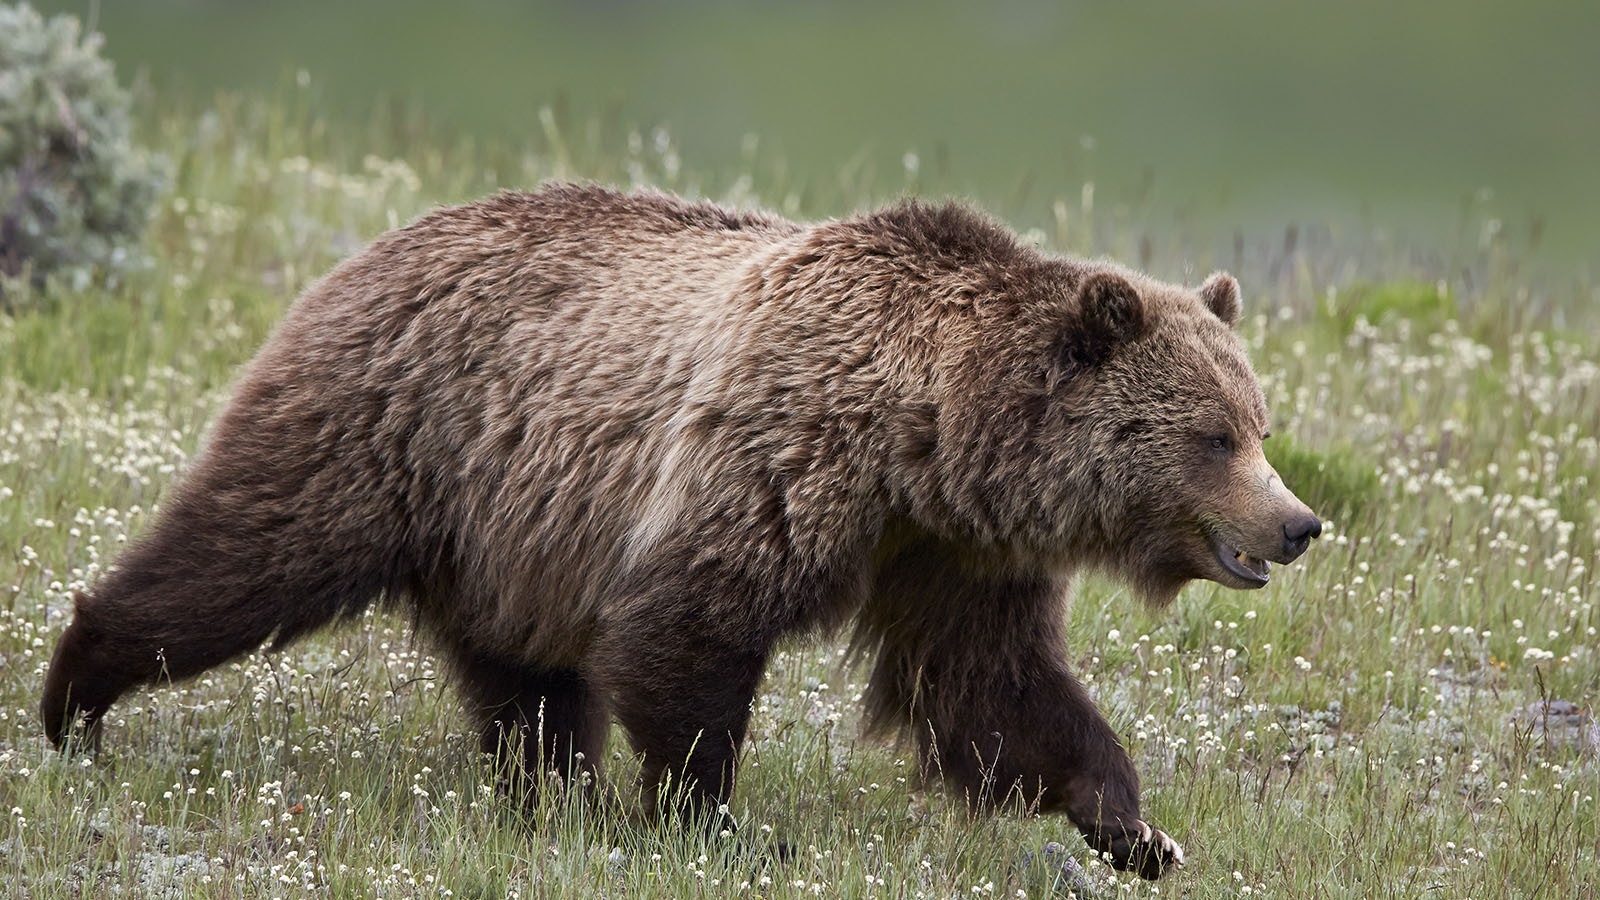 Despite Idaho's petition, grizzly bears remain on Endangered Species List  in the lower 48 states